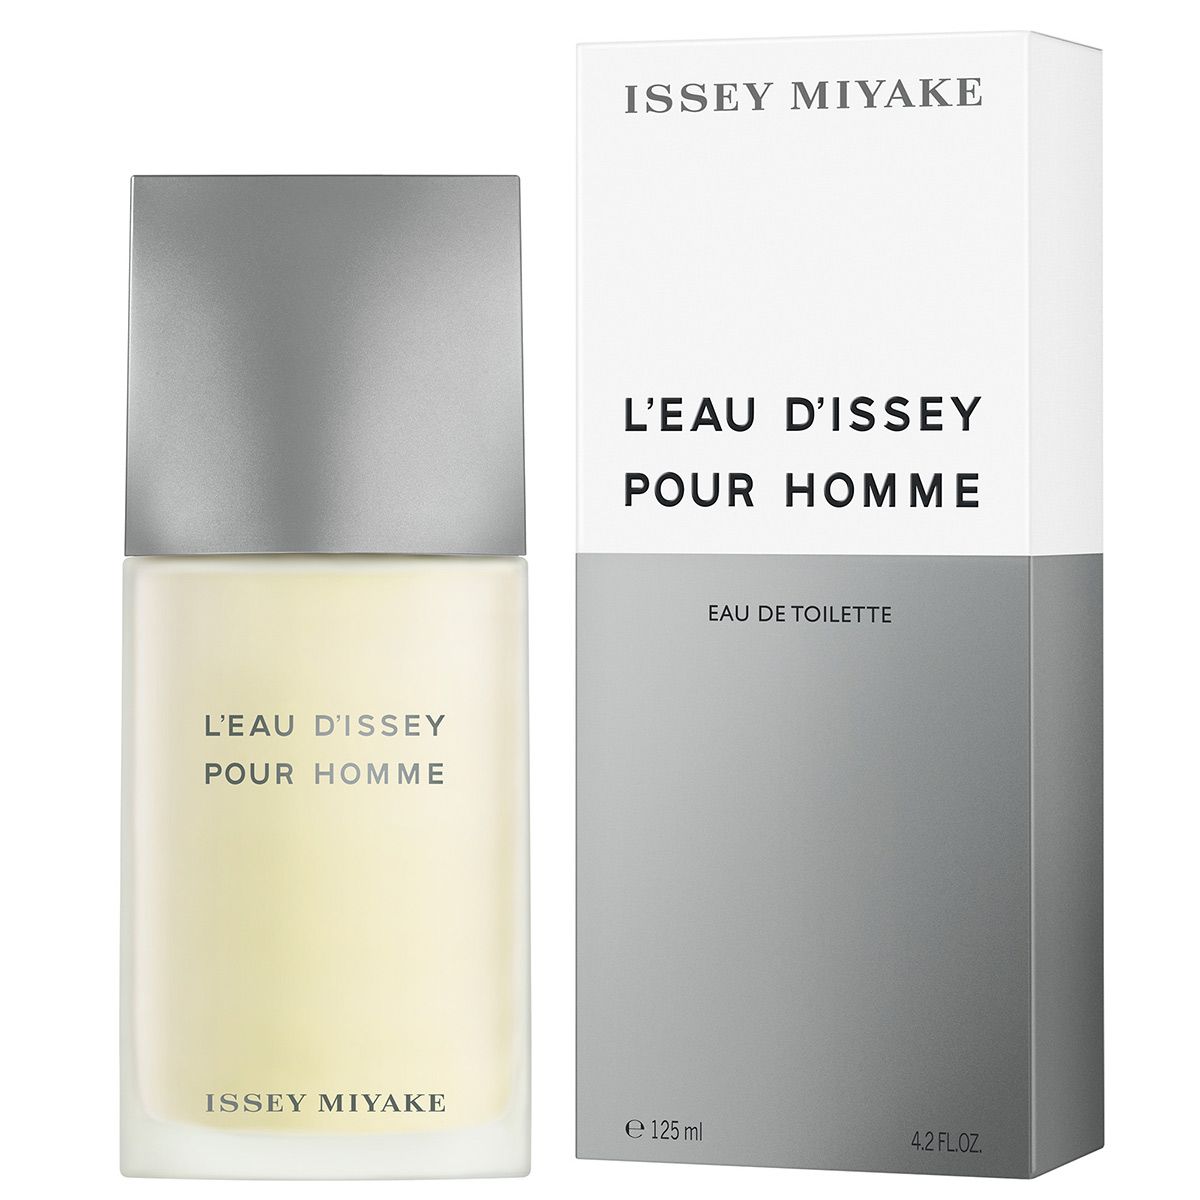  Issey Miyake L'Eau d'Issey Pour Homme 